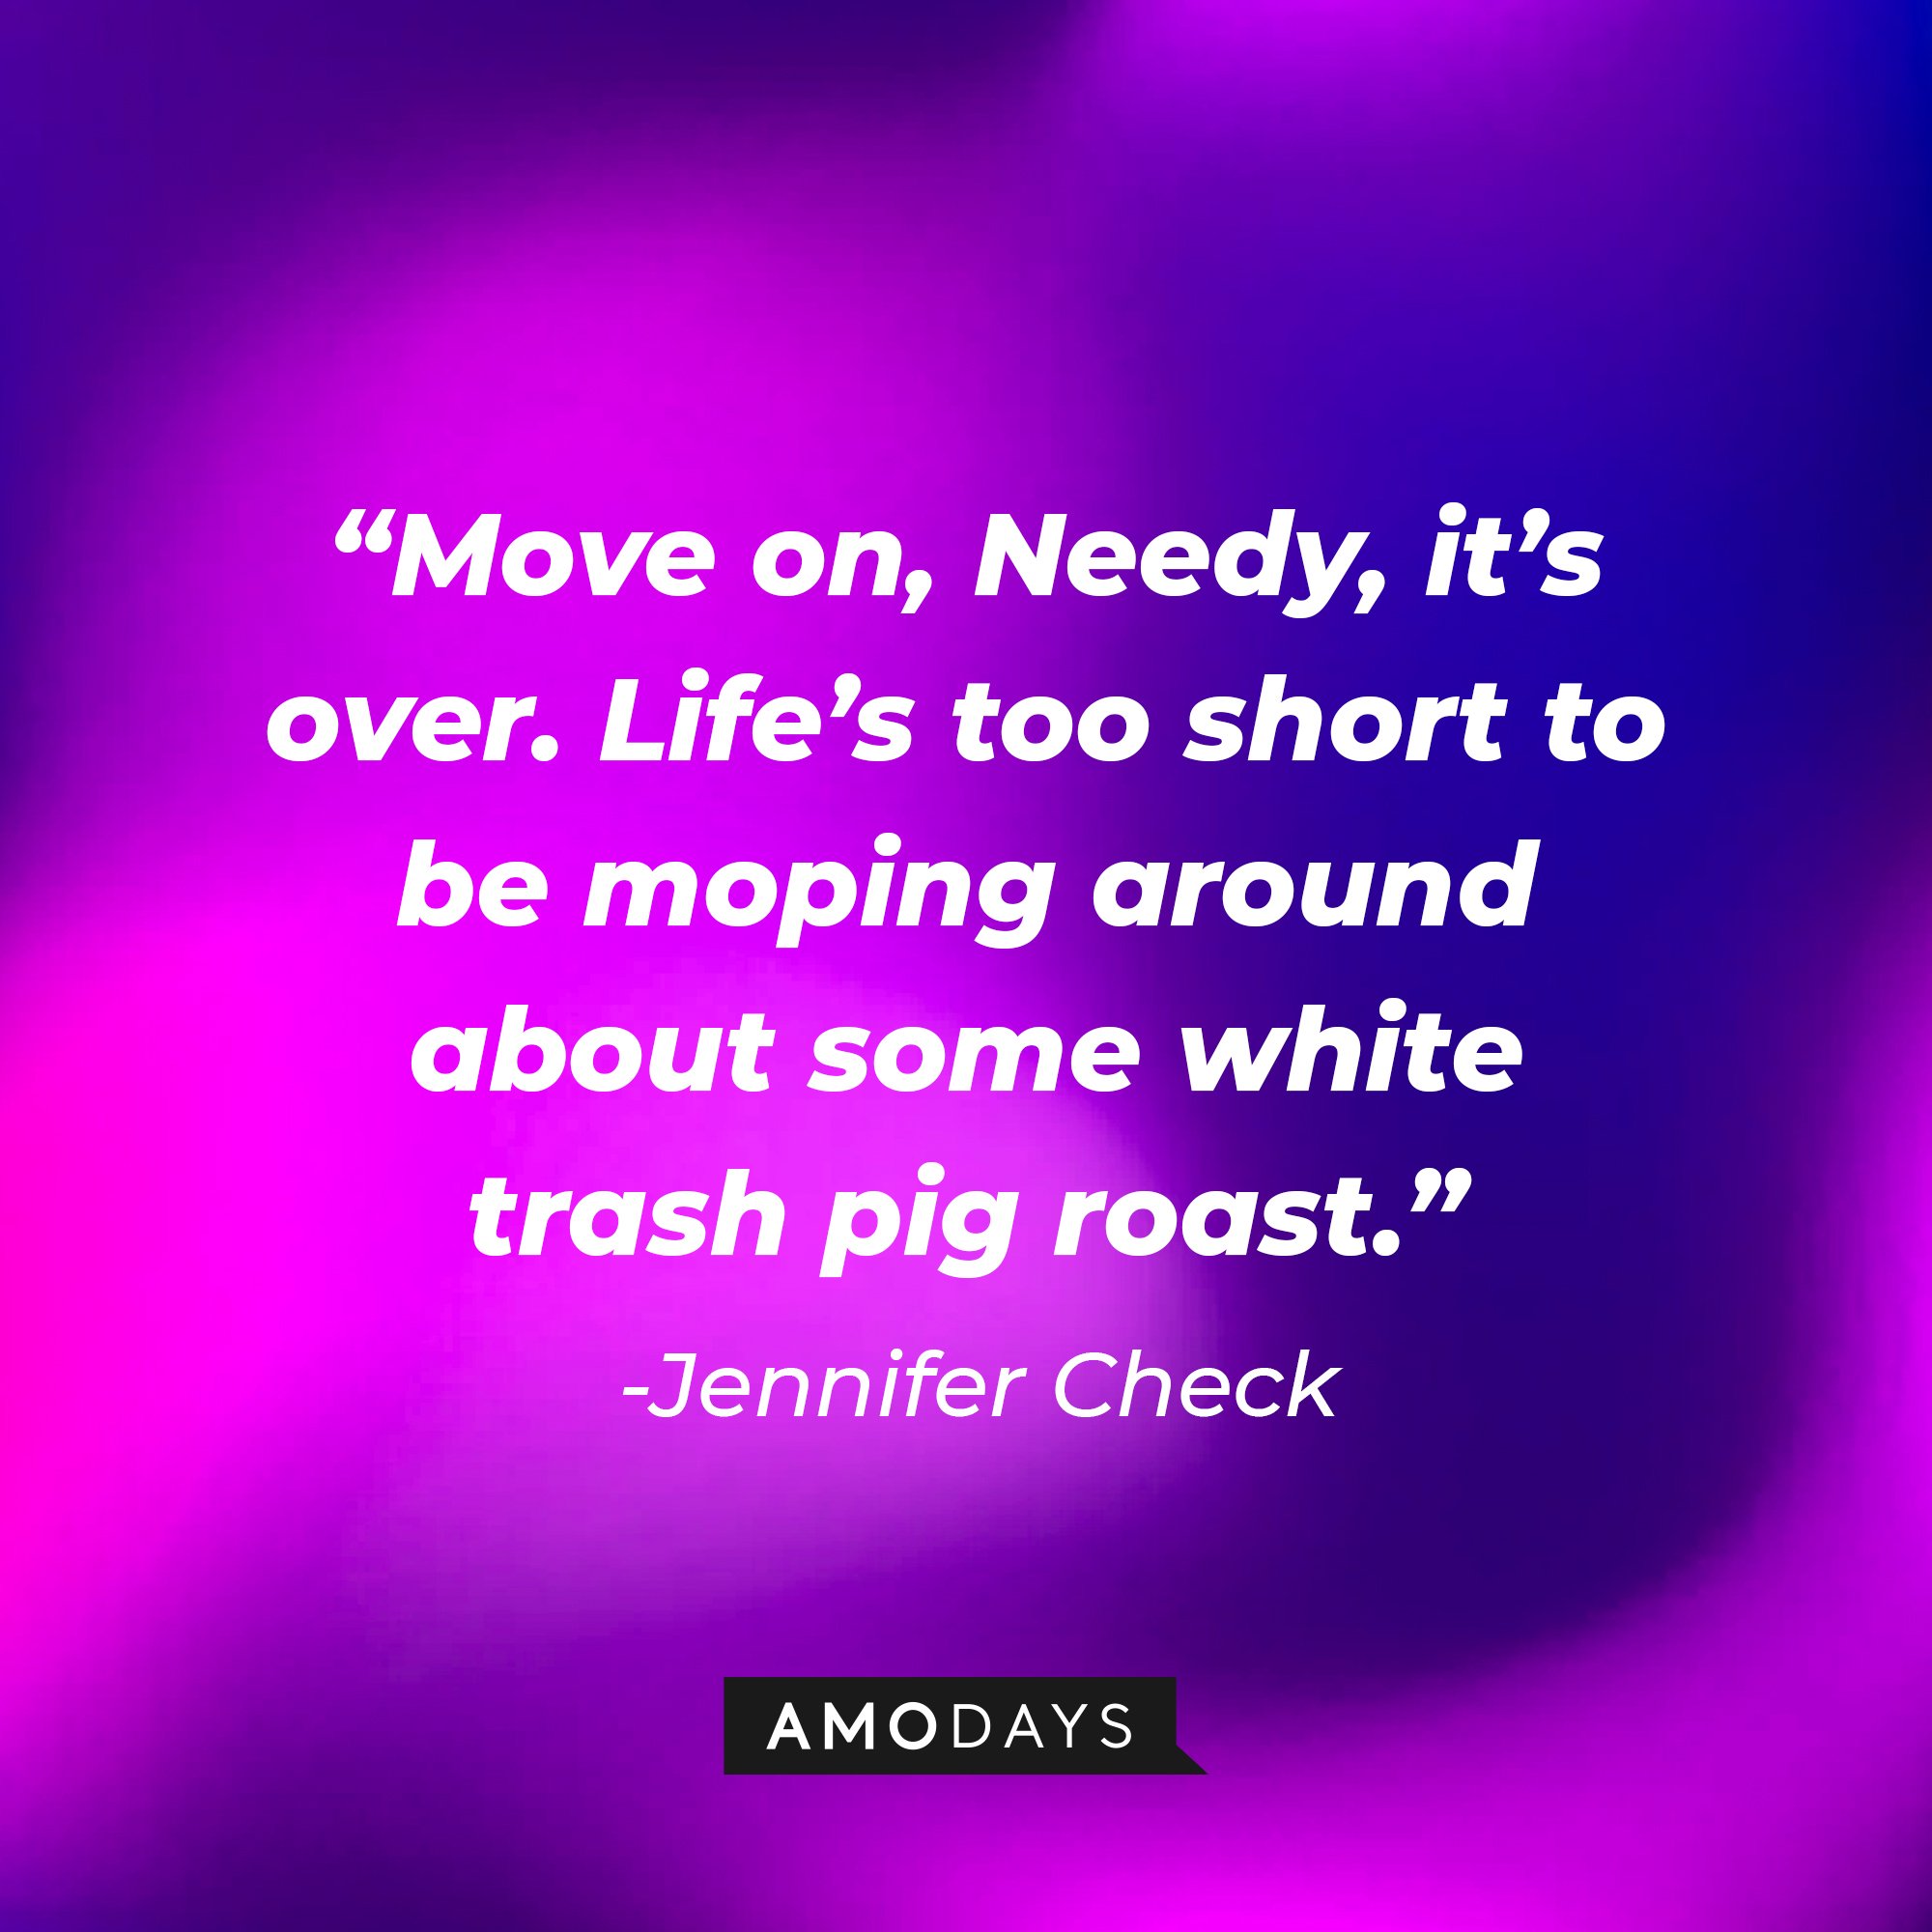 Jennifer Check’s quote: “Move on, Needy, it’s over. Life’s too short to be moping around about some white trash pig roast.” |Image: AmoDays